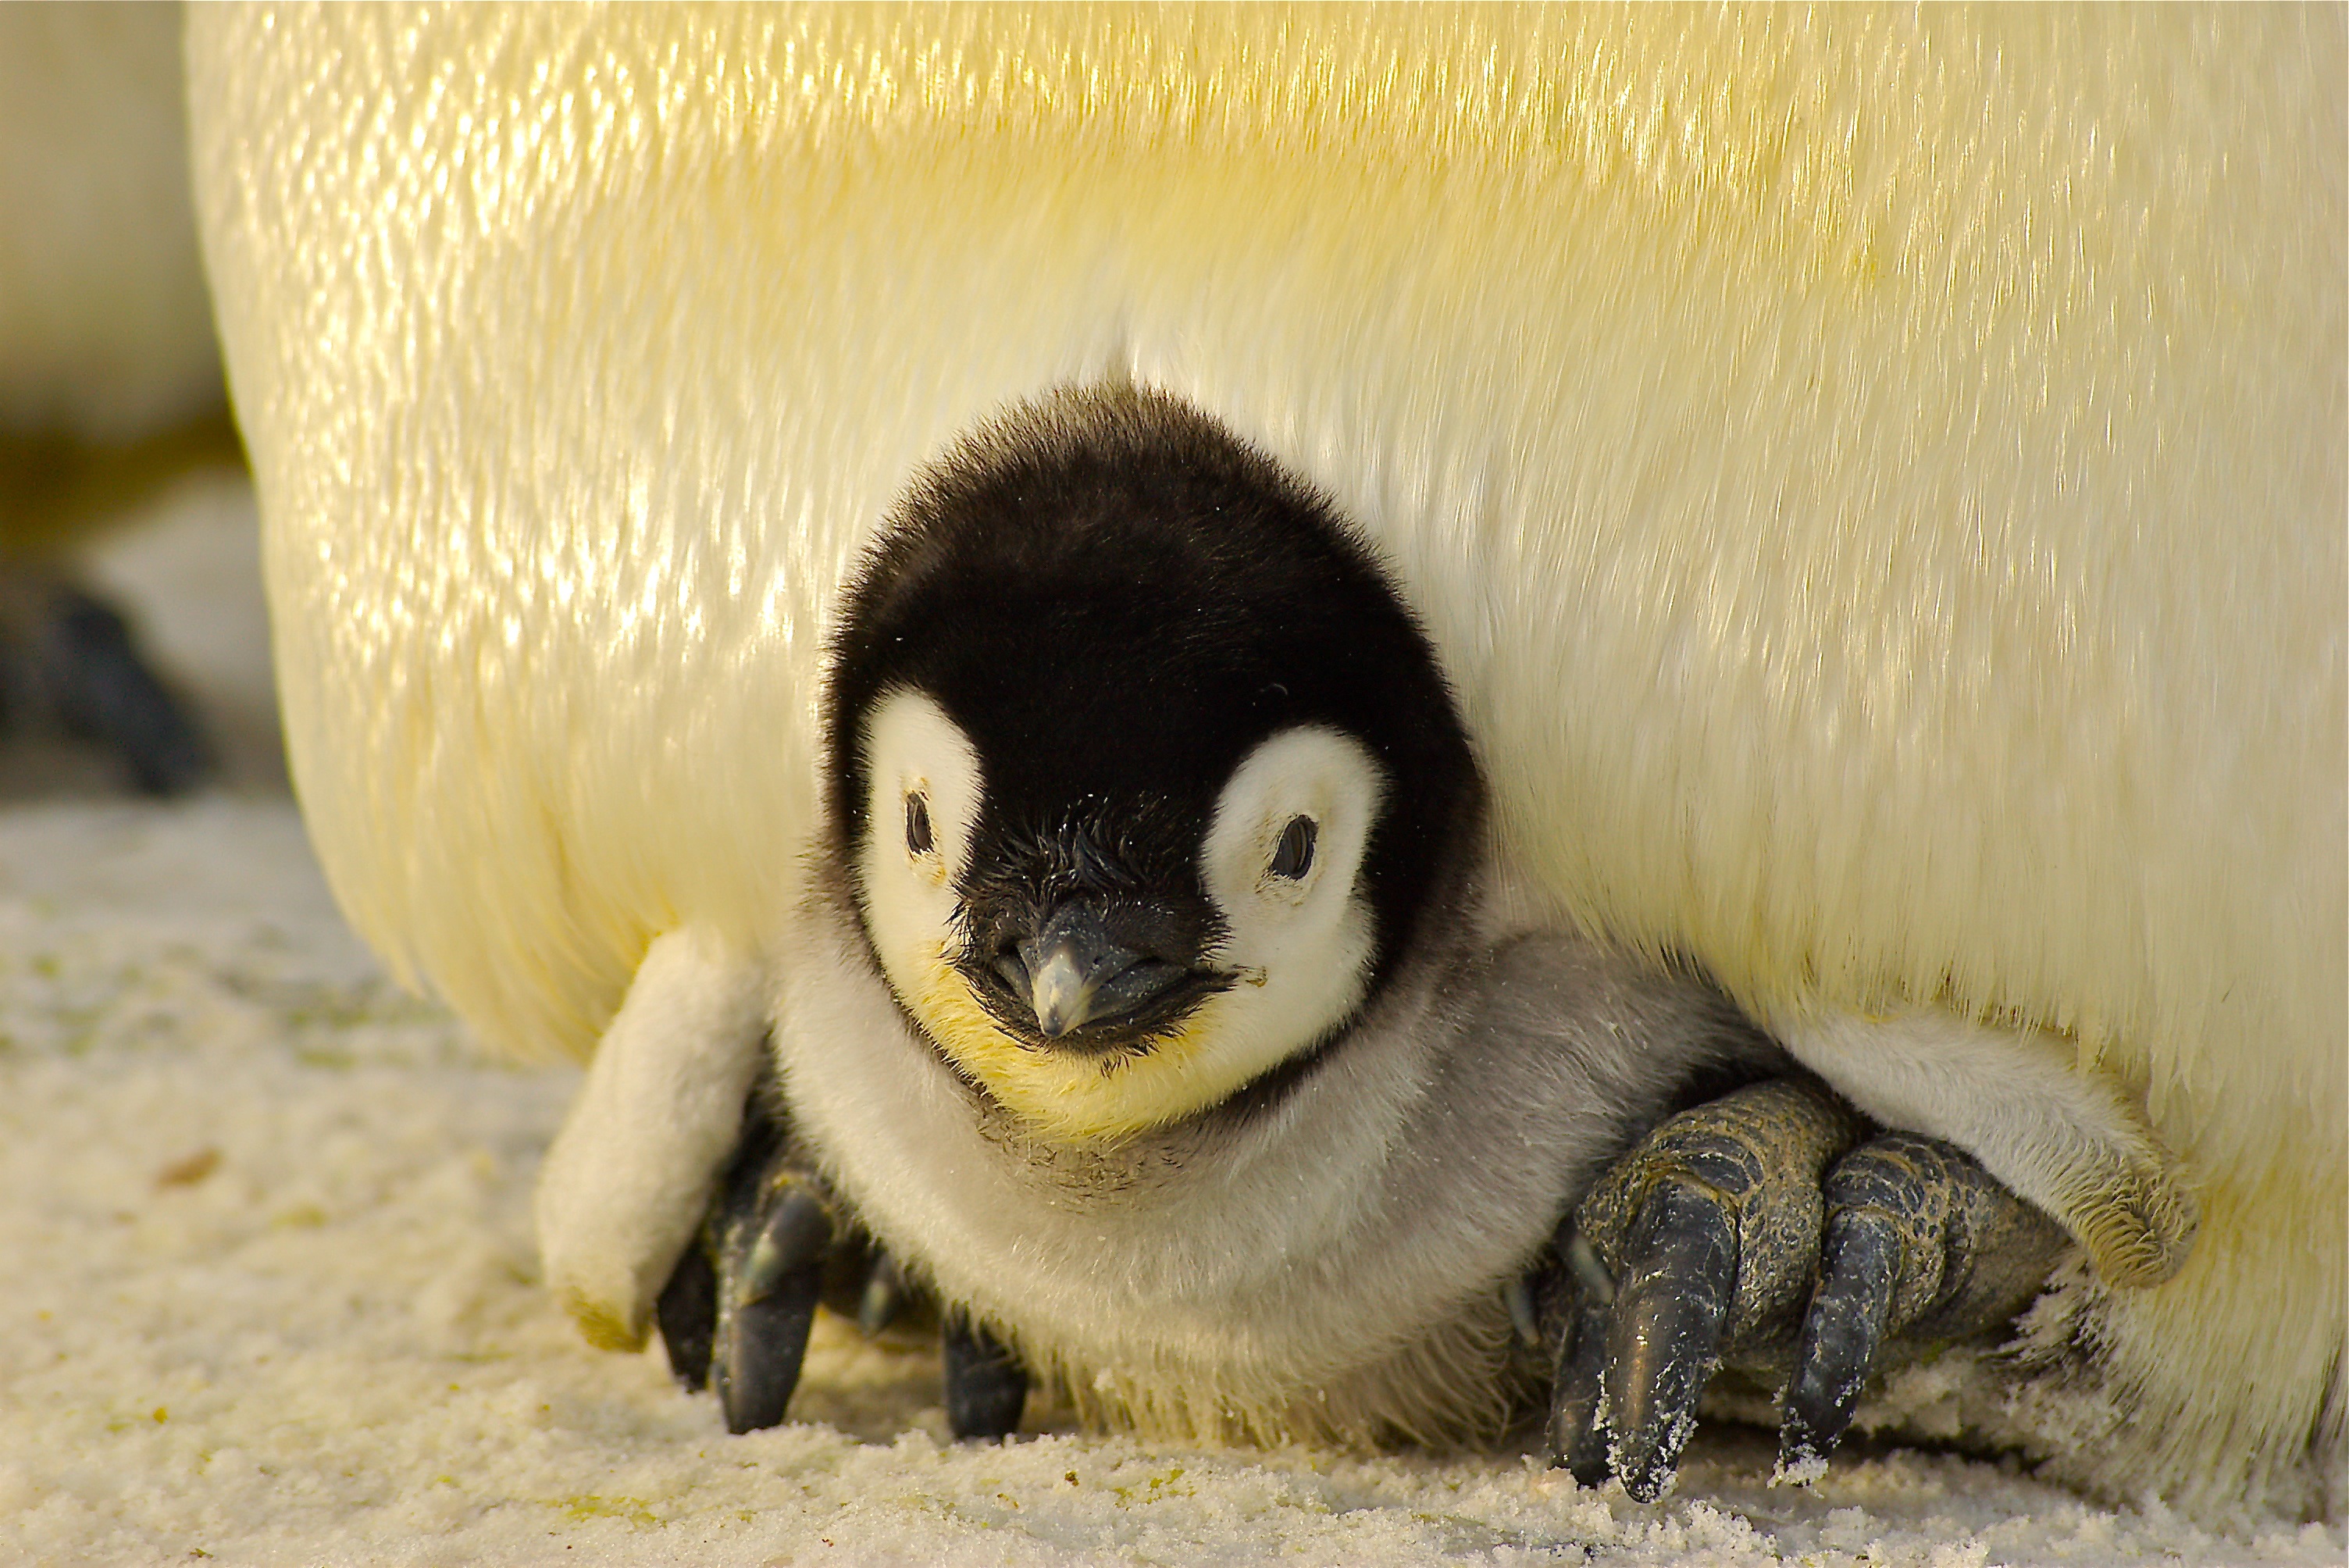 What Are Baby Penguins Called? - Penguins Blog